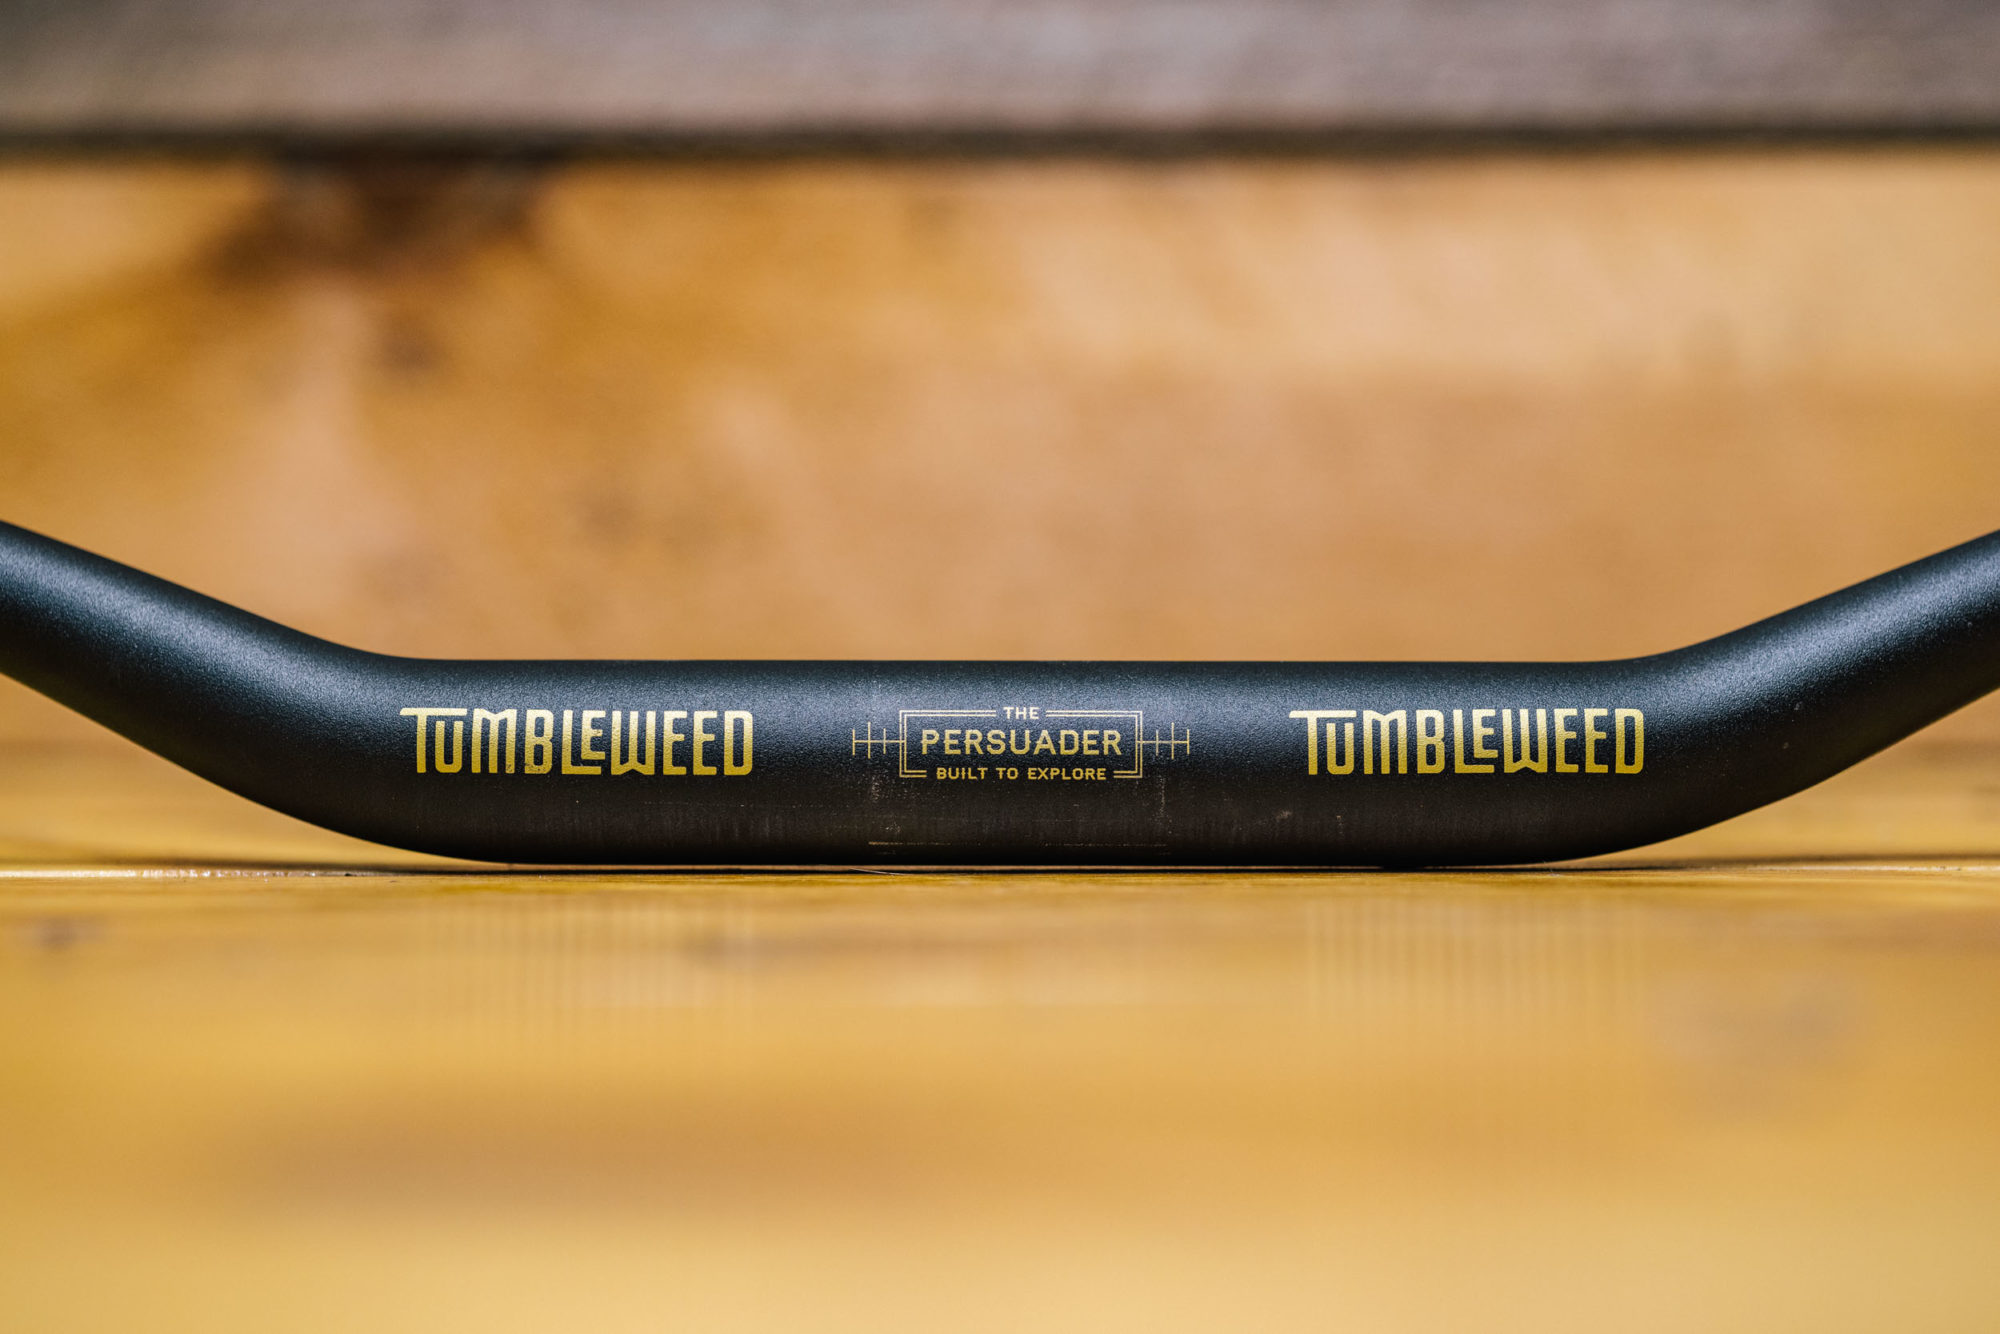 Tumbleweed Alloy Persuader Review